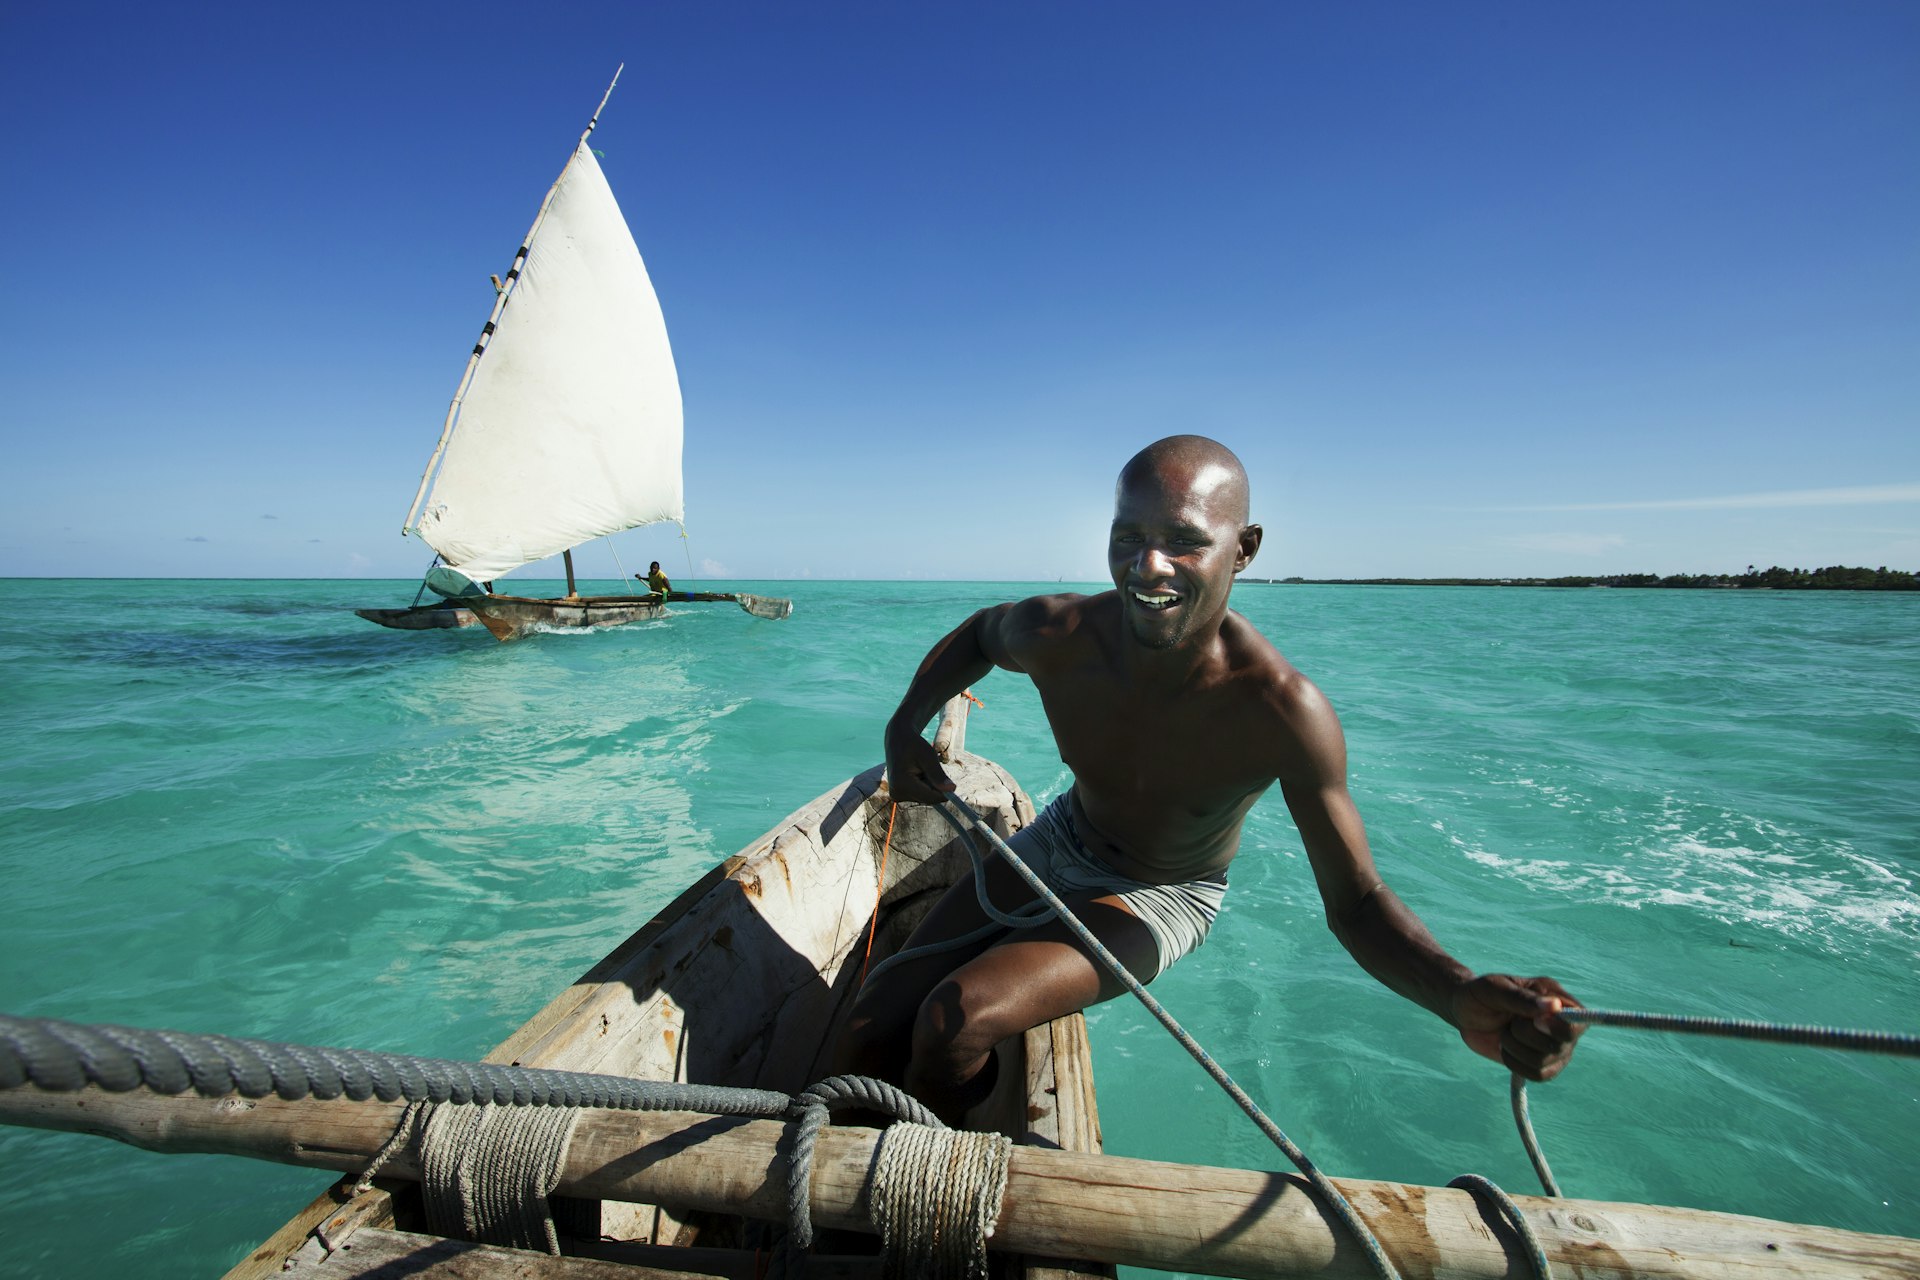 A traditional dhow sailing boat with a triangular sail on turquoise waters with a clear sky, manned by a smiling sailor leaning on the wooden hull.